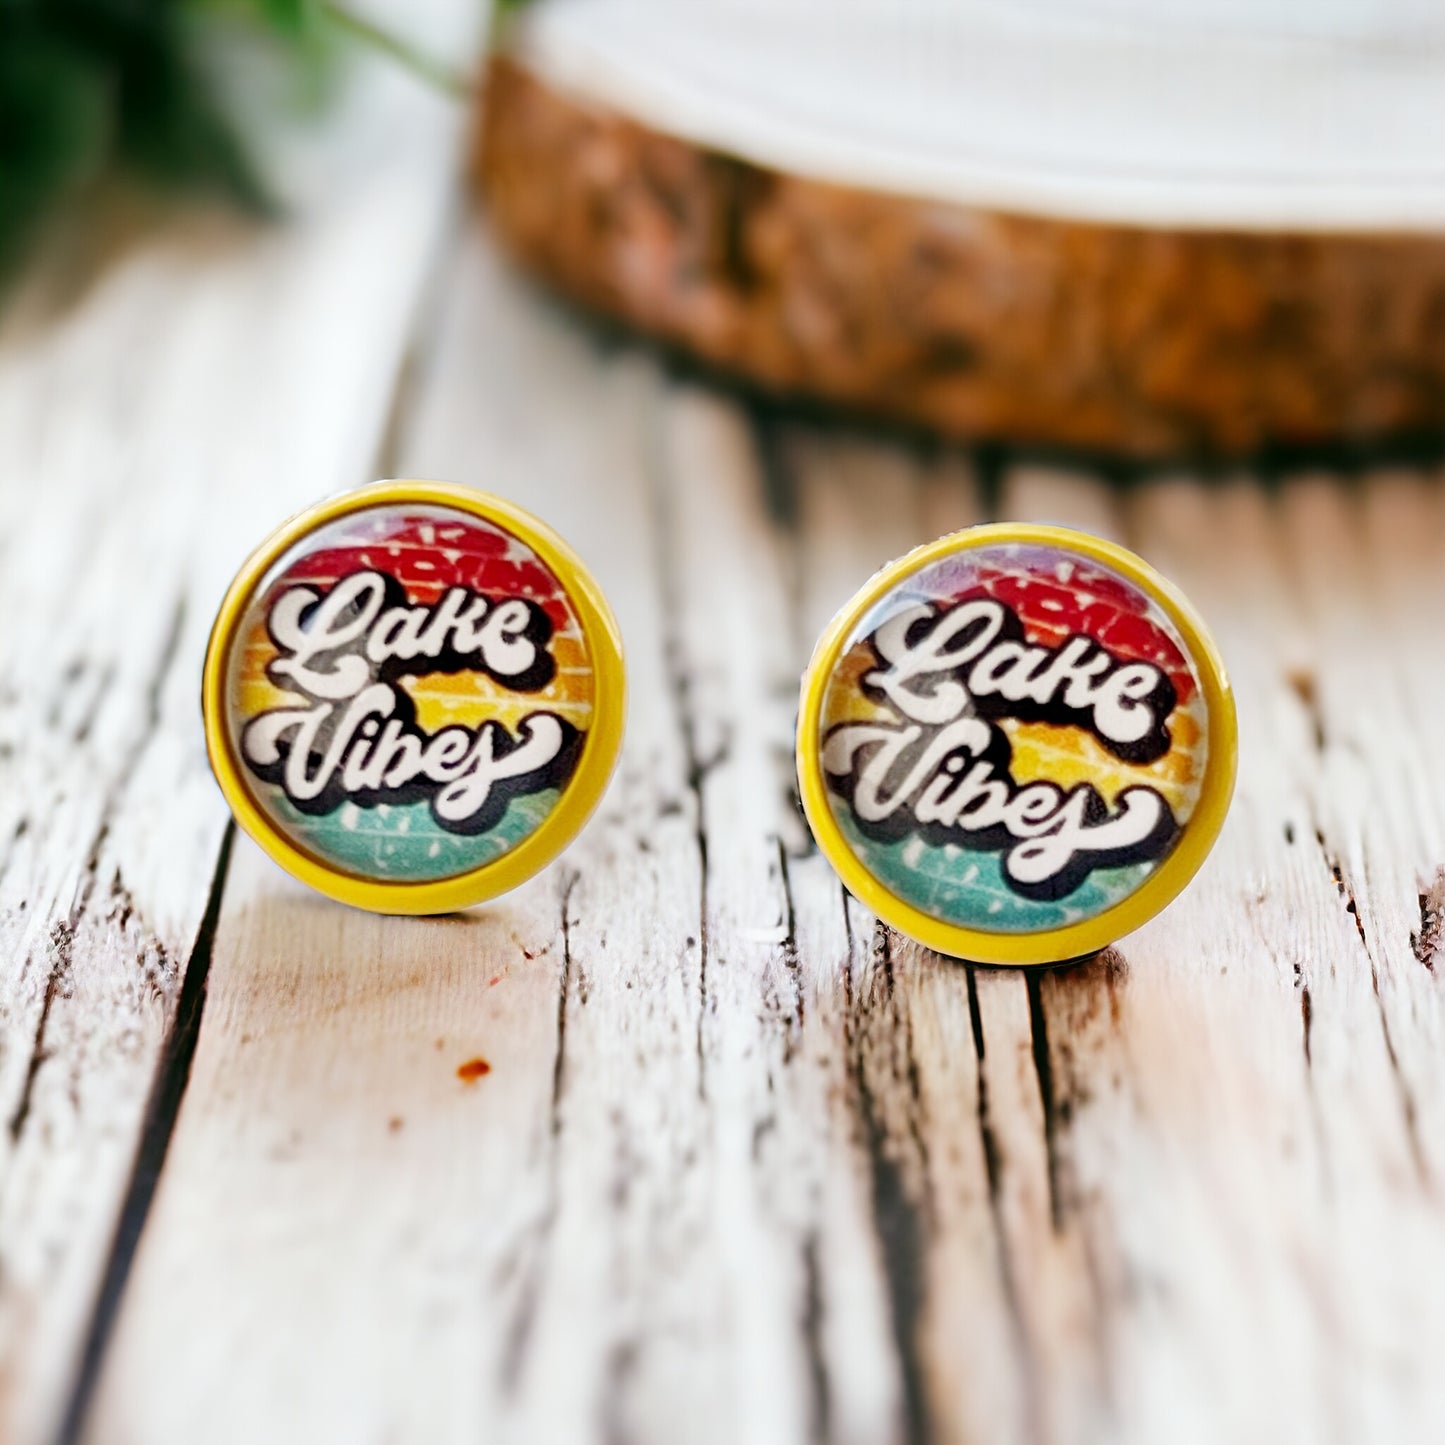 Yellow Stud Earrings with 'Lake Vibes' - Stylish & Vibrant Accessories